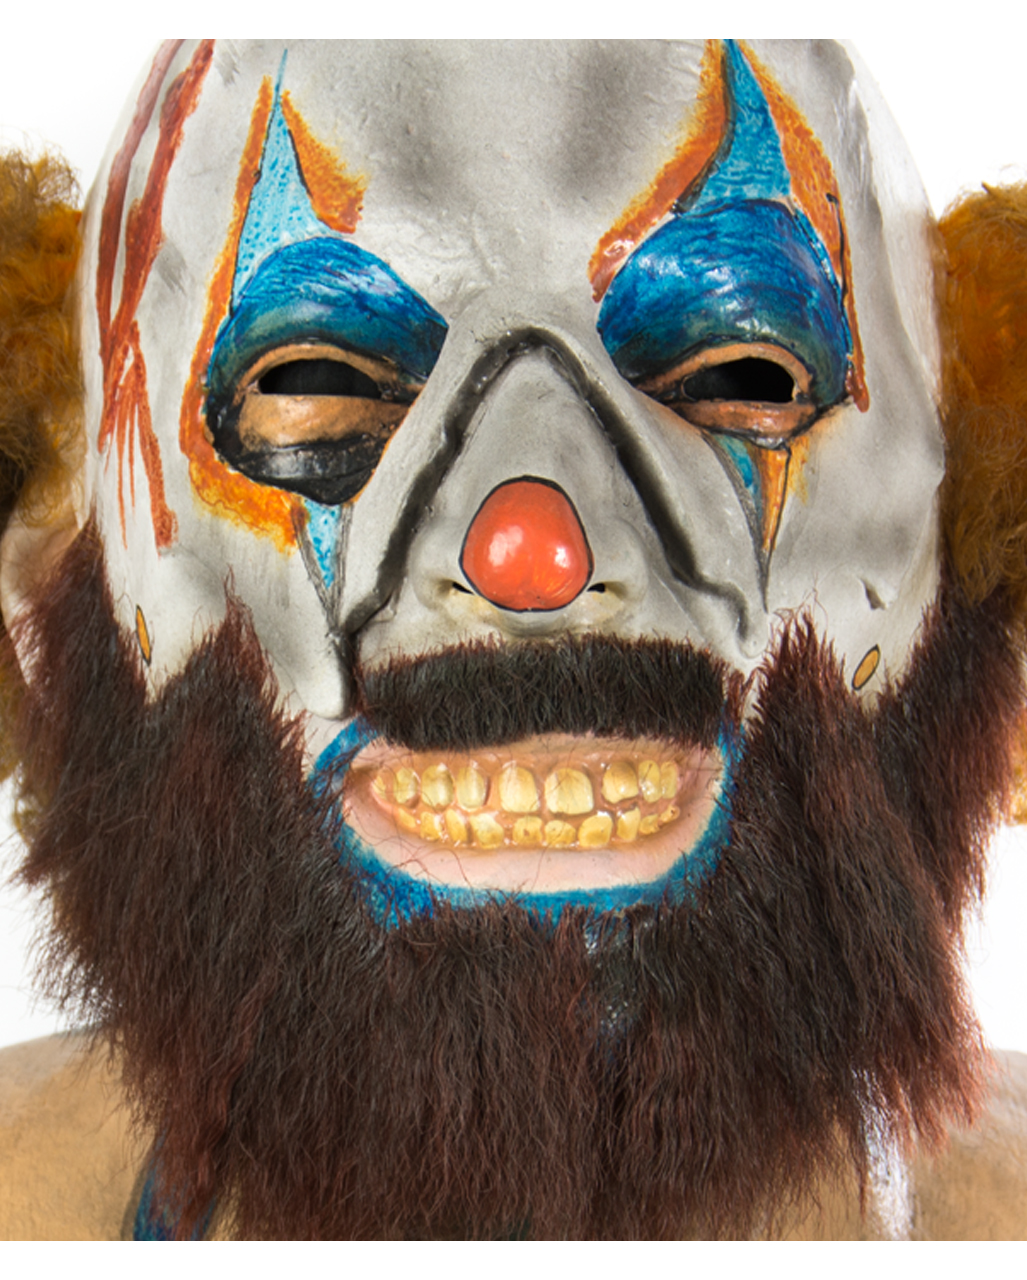 Rob Zombies 31 Schitzo Mask Offically Licensed Costume Killer Clown Movie